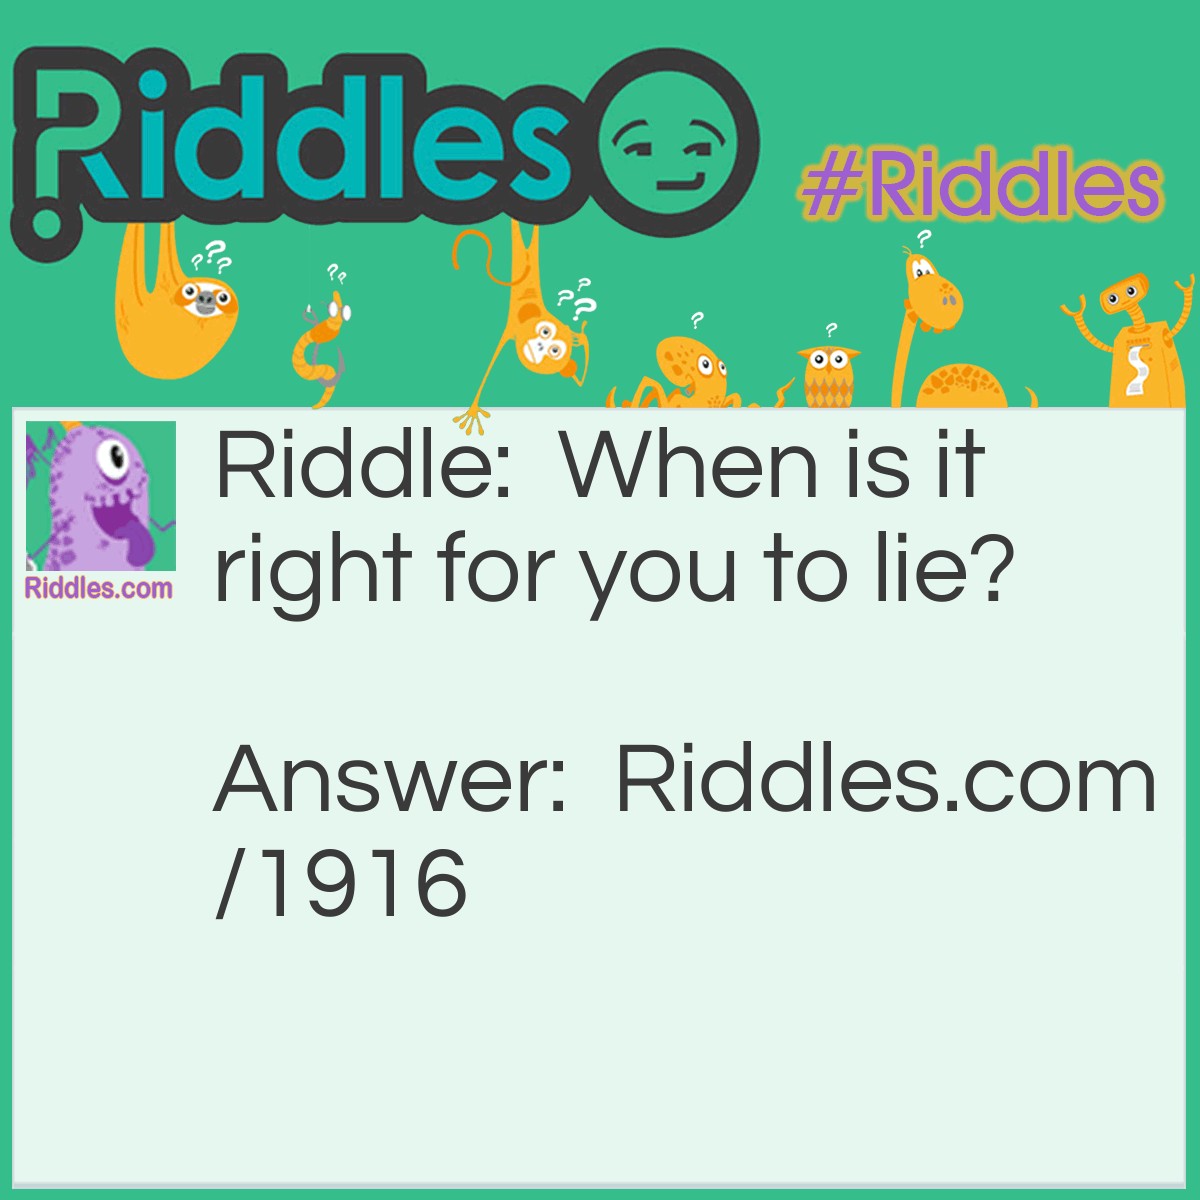 Riddle: When is it right for you to lie? Answer: When you are in bed.